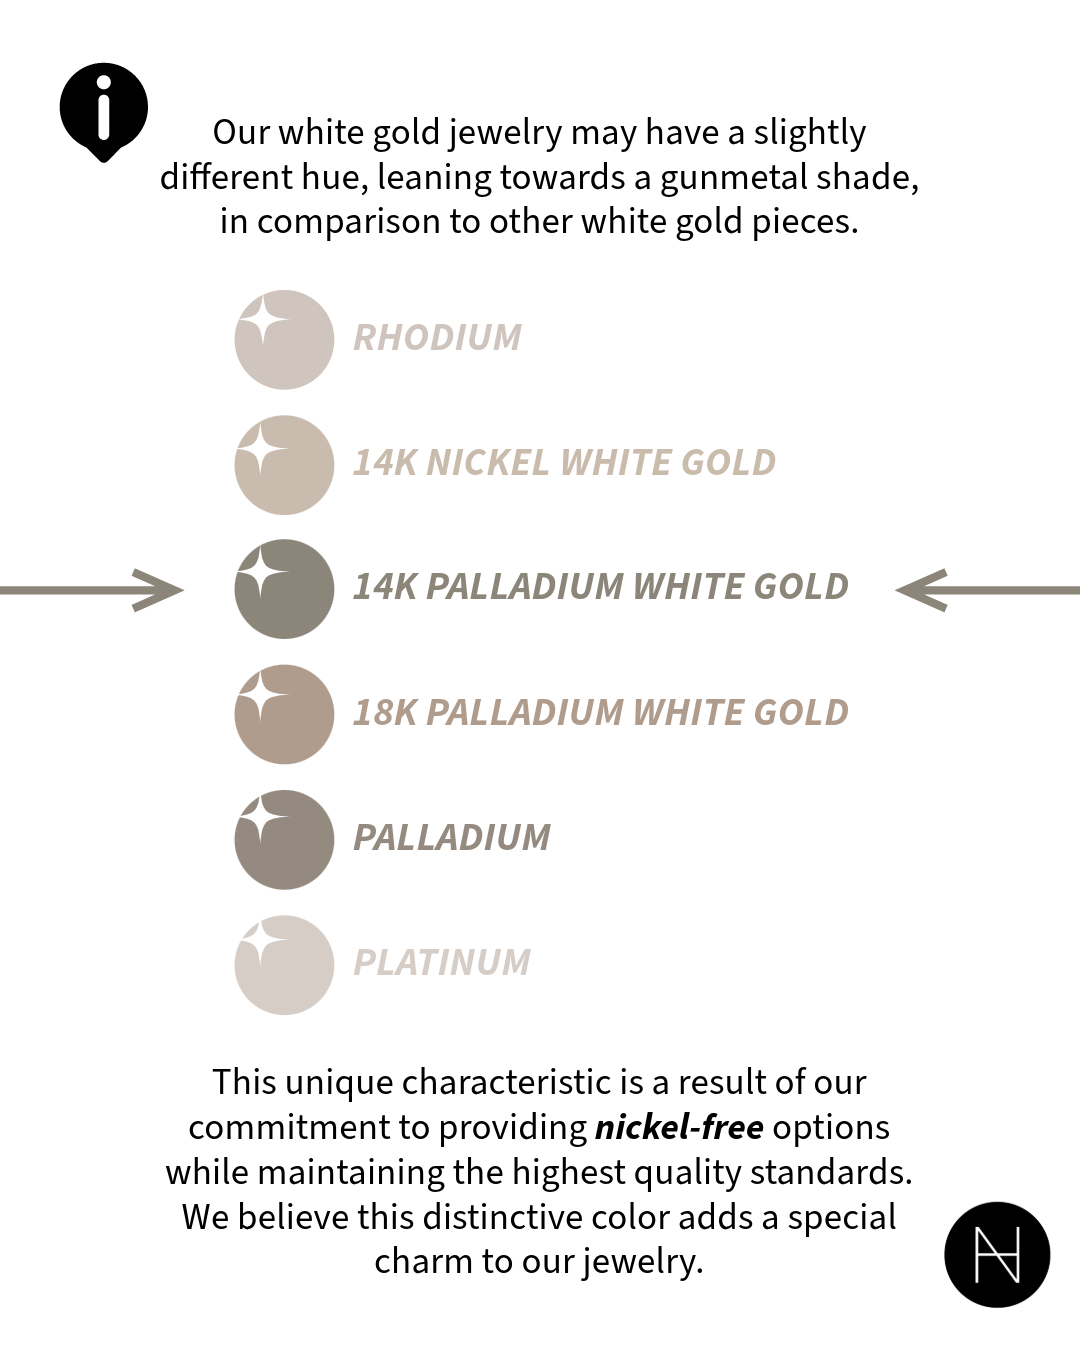 Please note that our nickel-free white gold jewelry may have a slightly different hue, leaning towards a gunmetal shade, in comparison to other white gold pieces. This unique characteristic is a result of our commitment to providing nickel-free options while maintaining the highest quality standards.